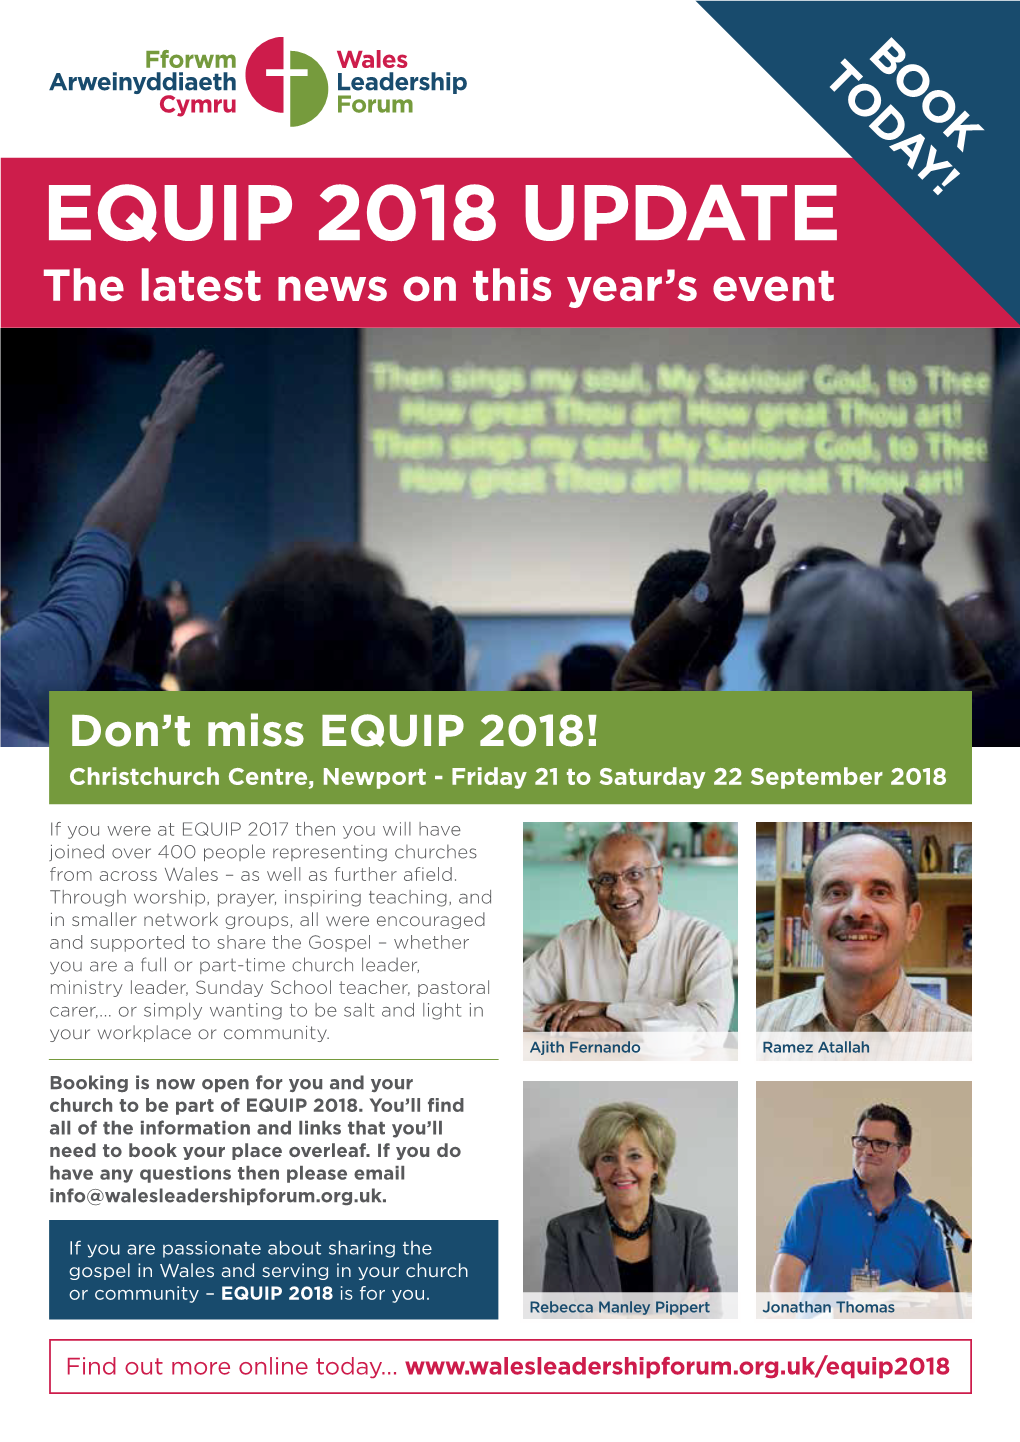 EQUIP 2018 UPDATE the Latest News on This Year’S Event